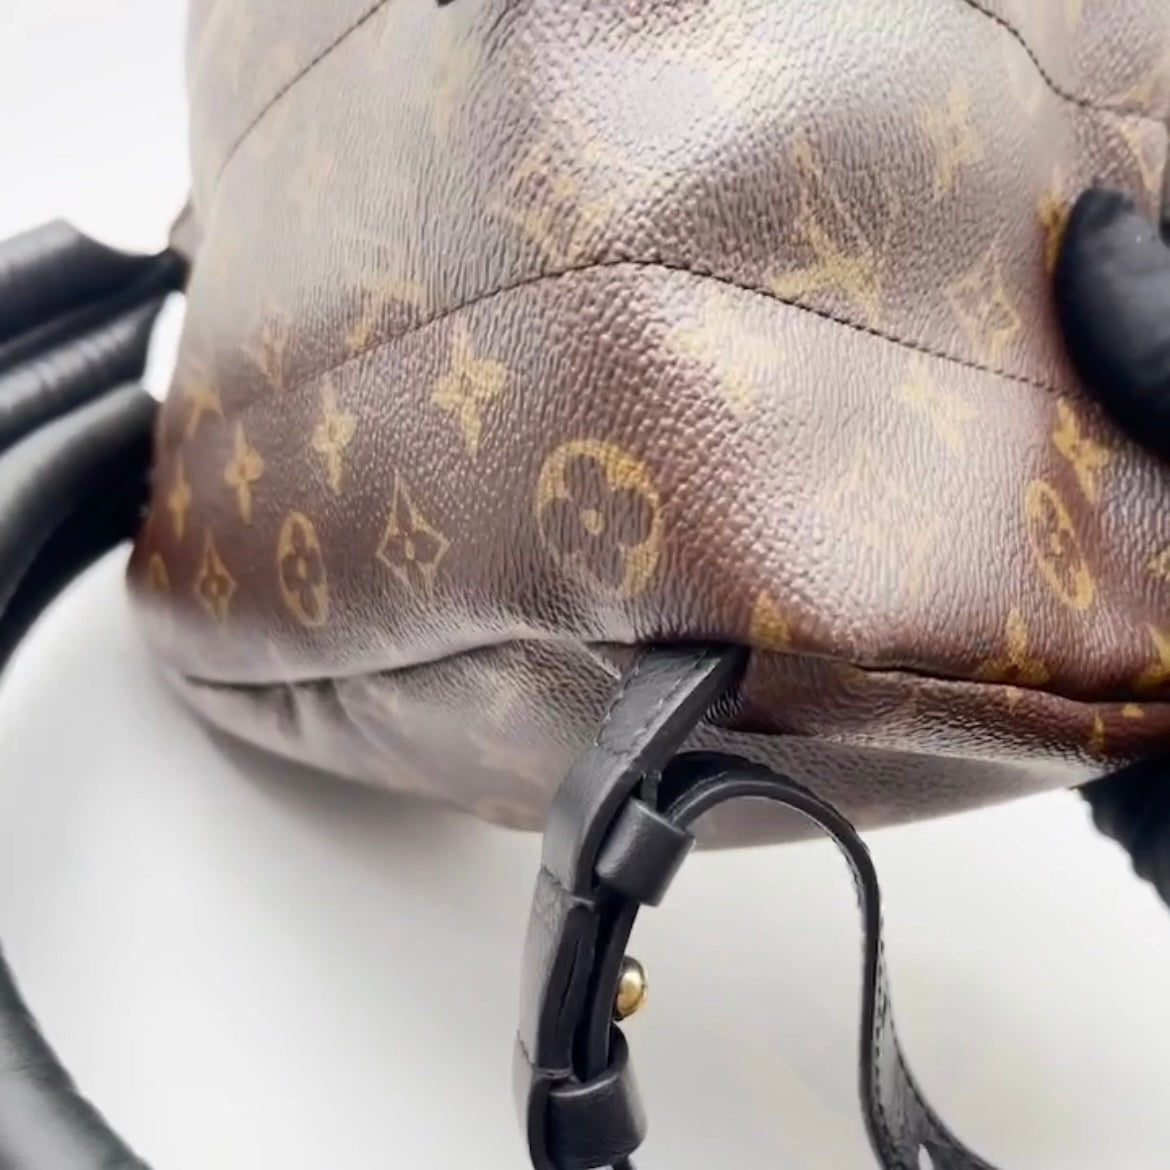 Louis Vuitton LV Palm Springs Backpack Small